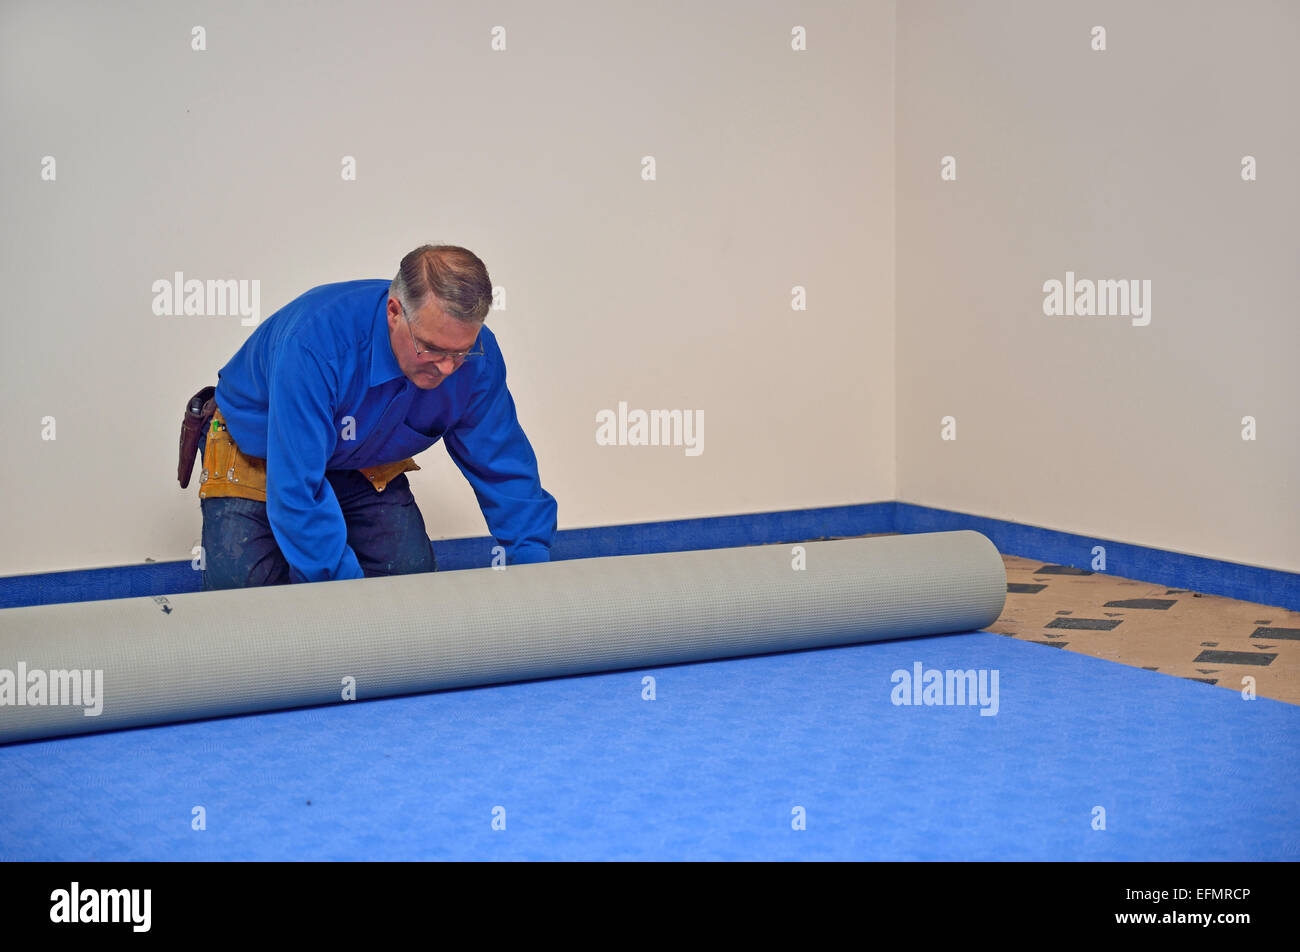 A floorlayer rolls out the new carpet in a floorlaying job Stock Photo